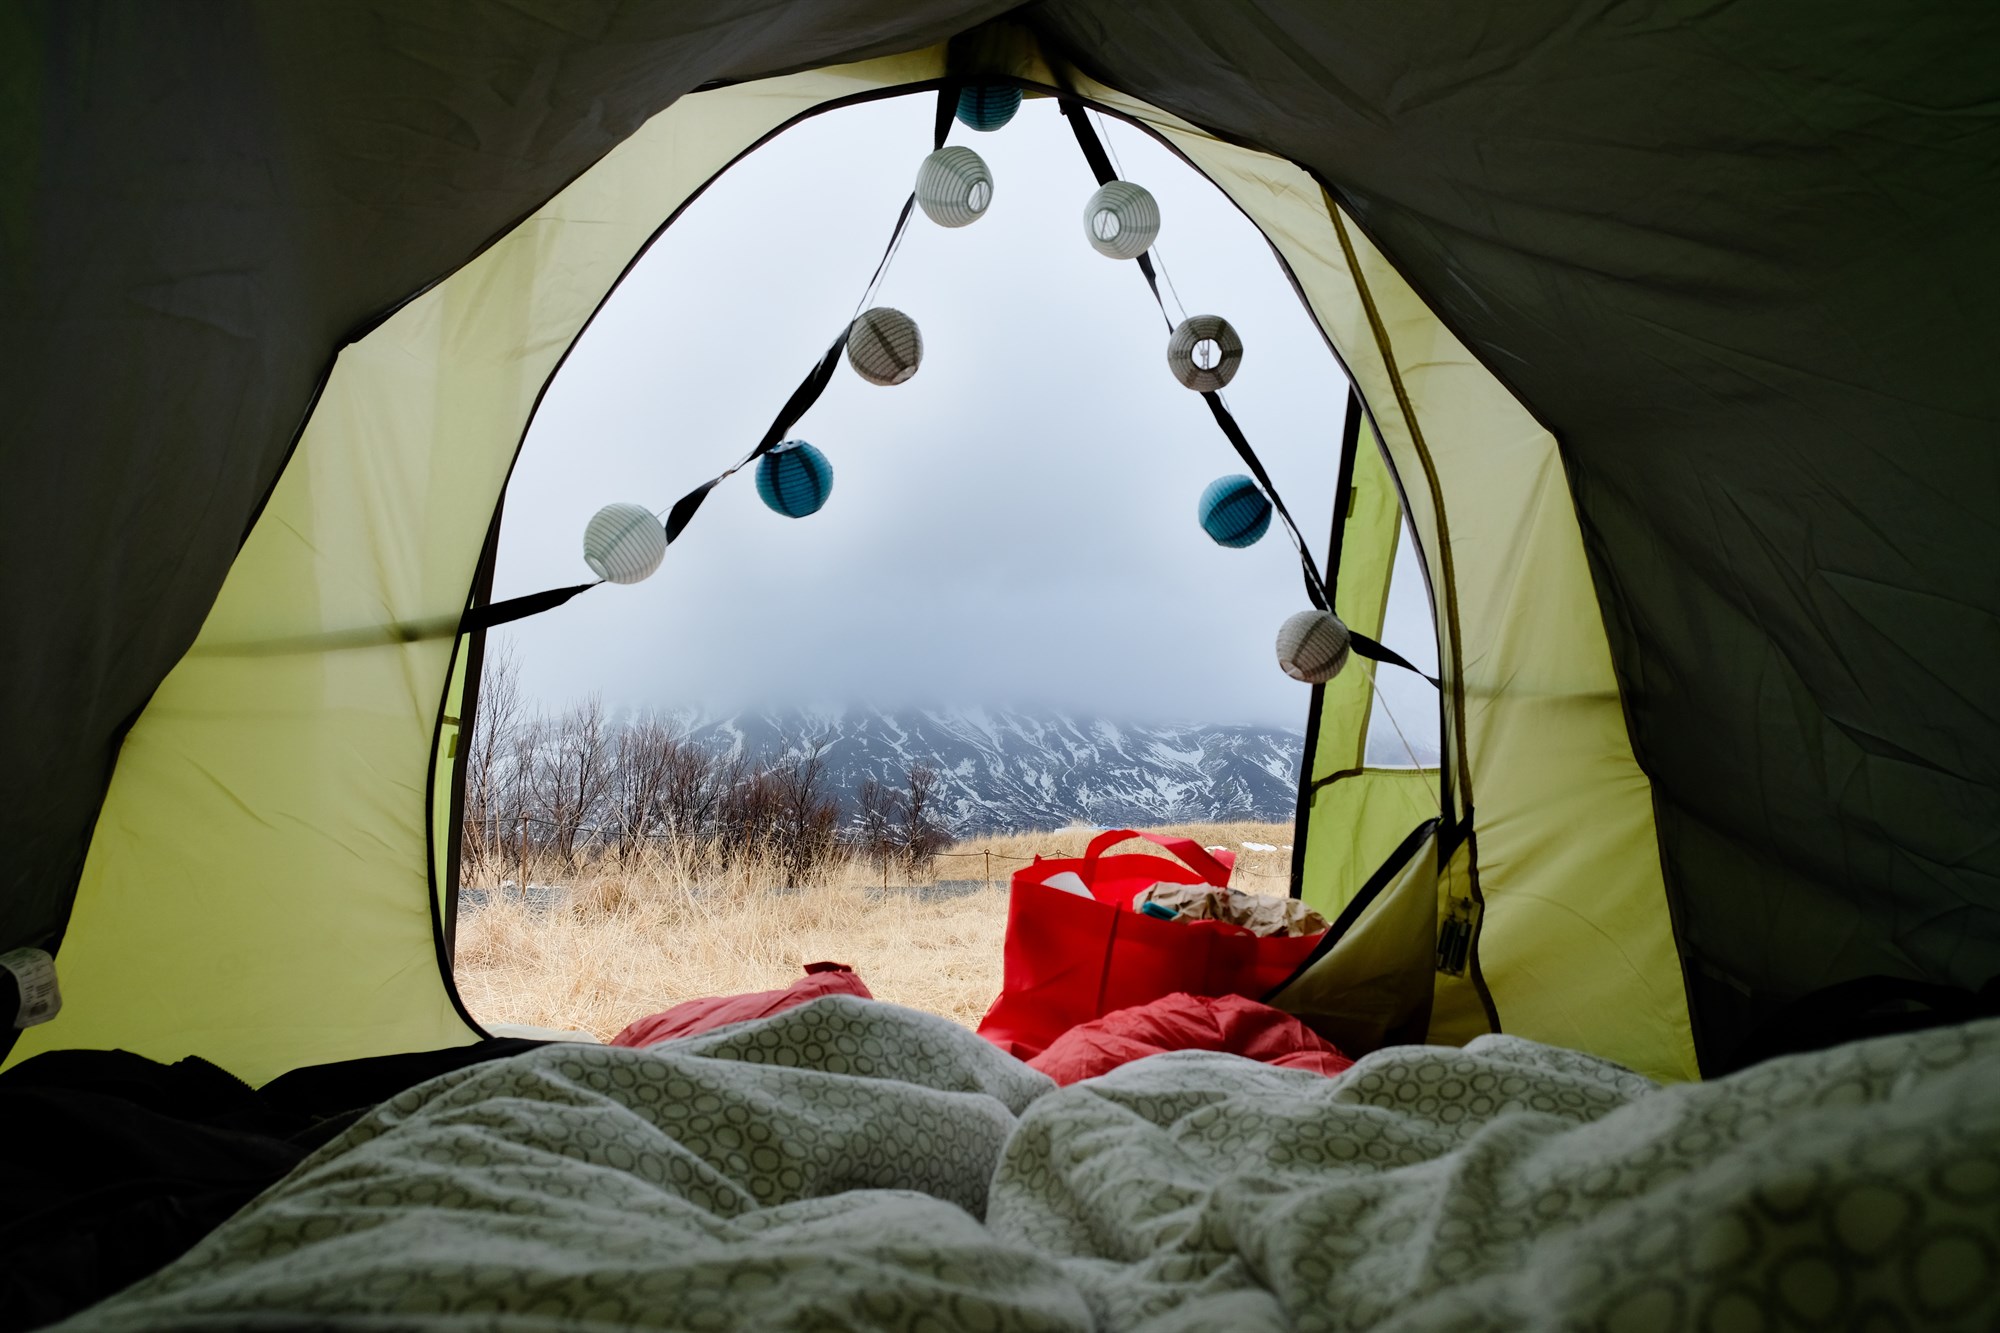 View from inside a tent at a campsite in Thingvellir, Iceland